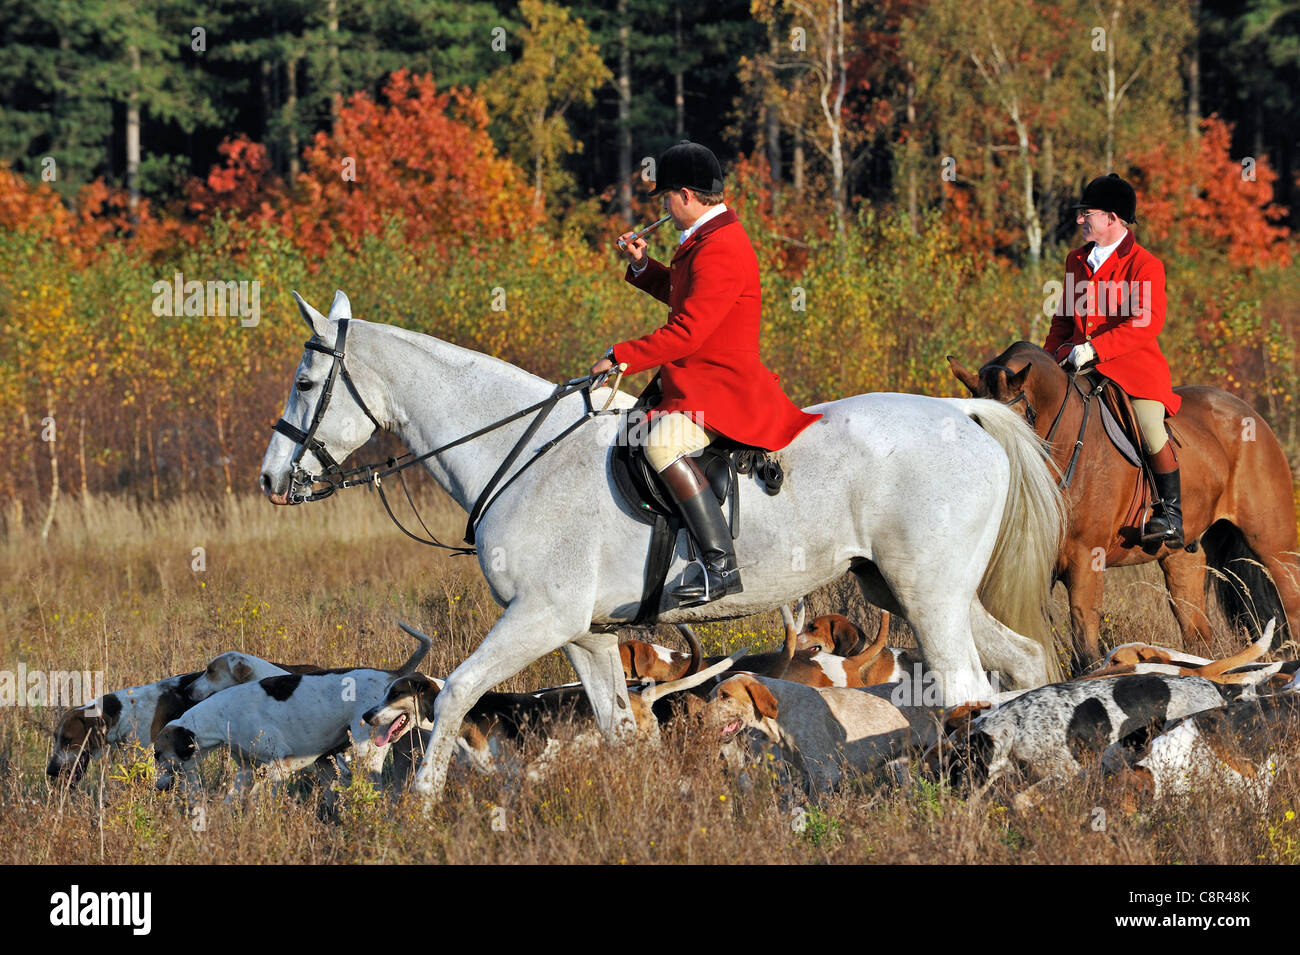 https://c8.alamy.com/comp/C8R48K/hunter-wearing-red-coat-blowing-horn-while-riding-on-horseback-with-C8R48K.jpg